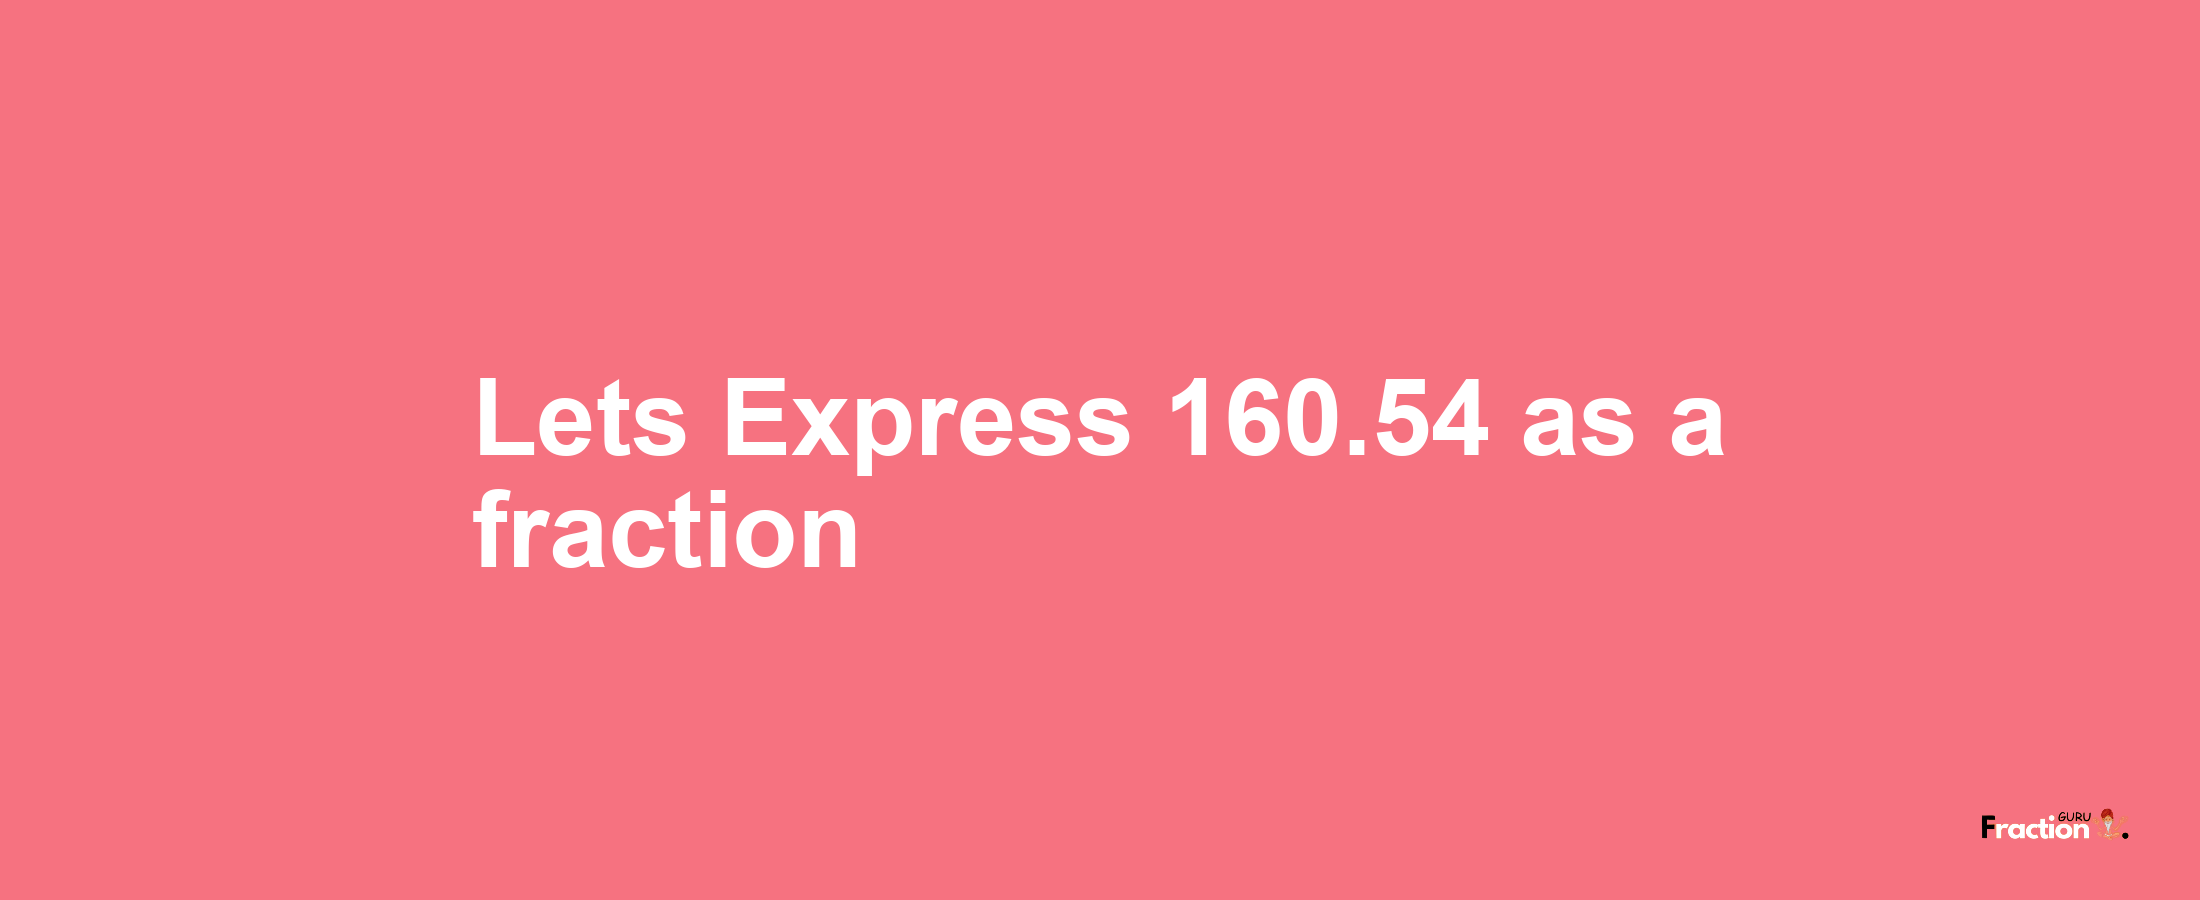 Lets Express 160.54 as afraction